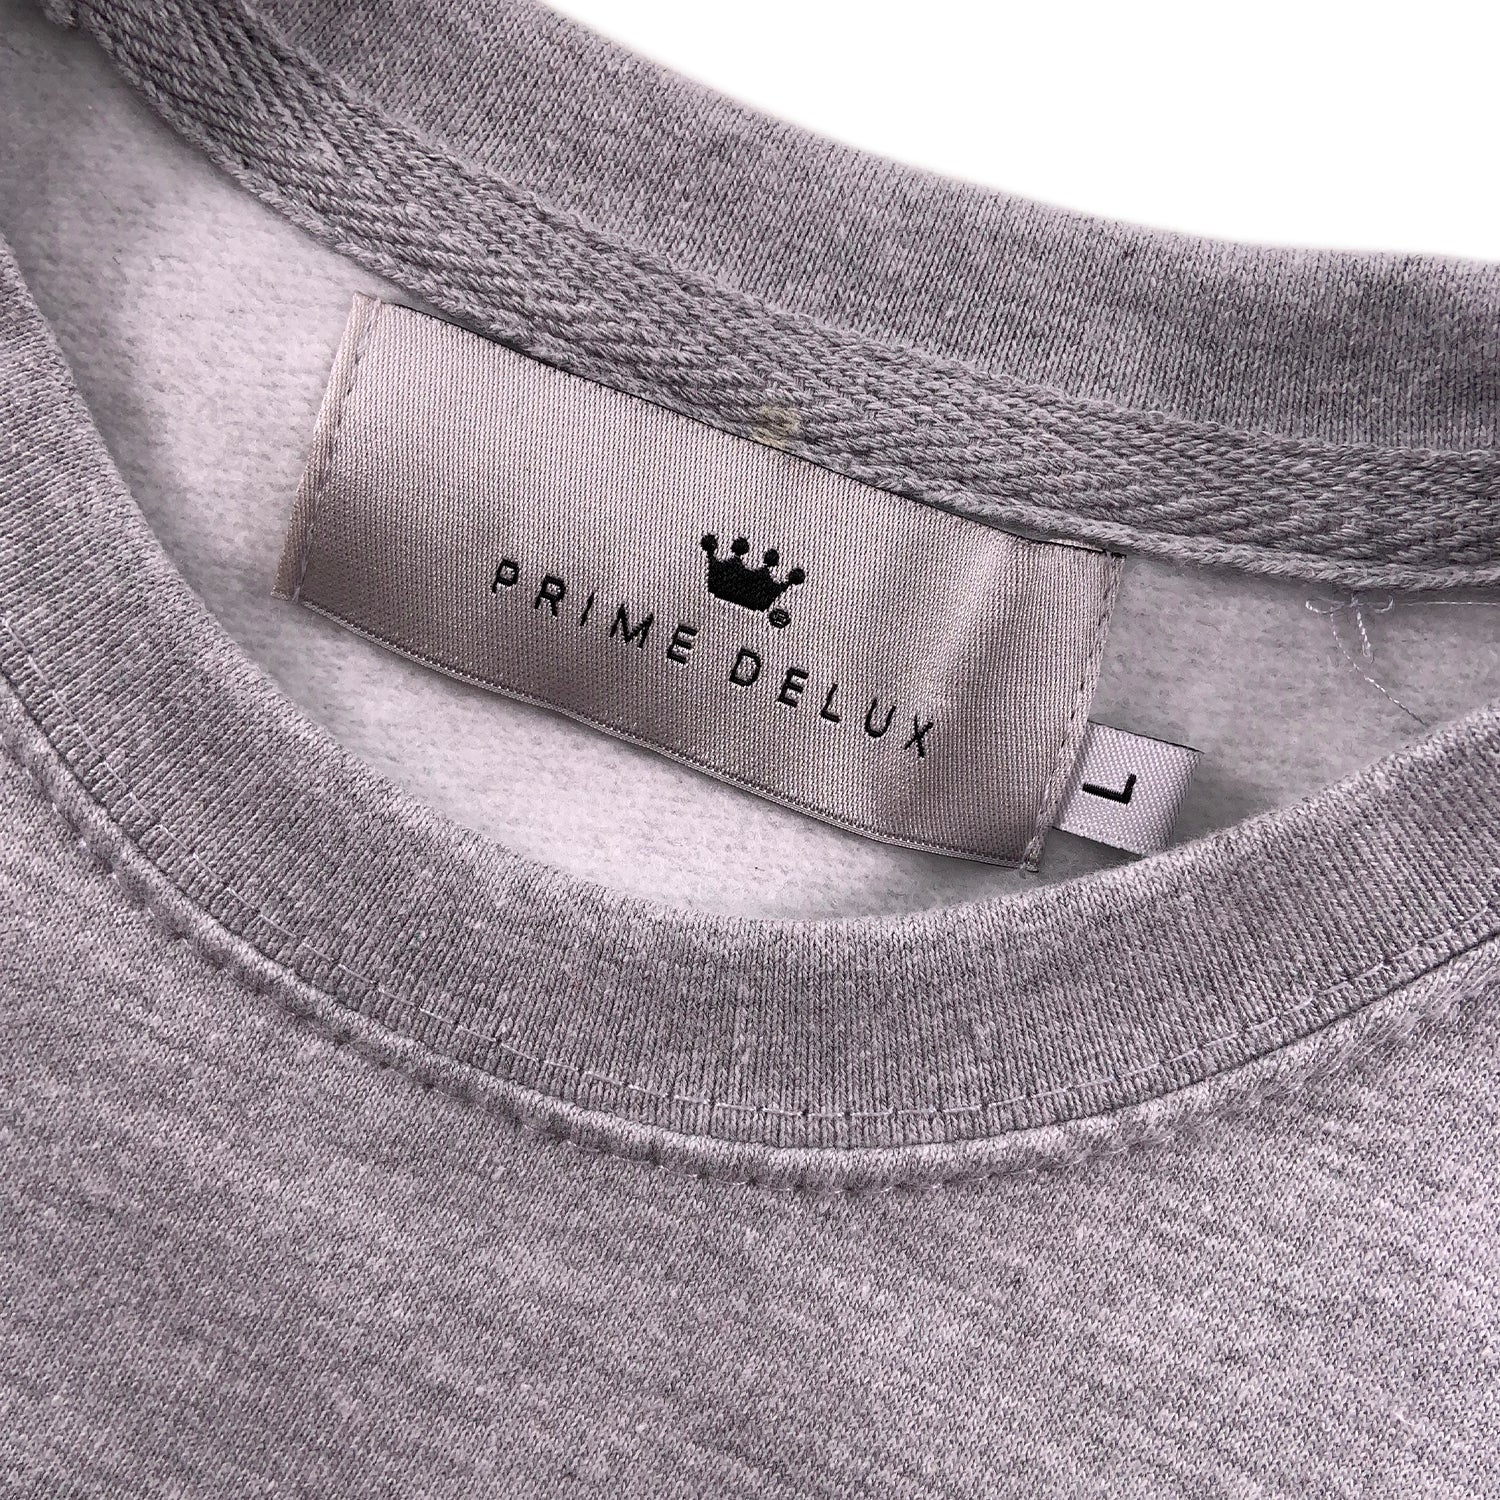 PRIME DELUX YOUTHS OG PREMIUM CREW SWEAT - HEATHER GREY / WHITE - Prime Delux Store